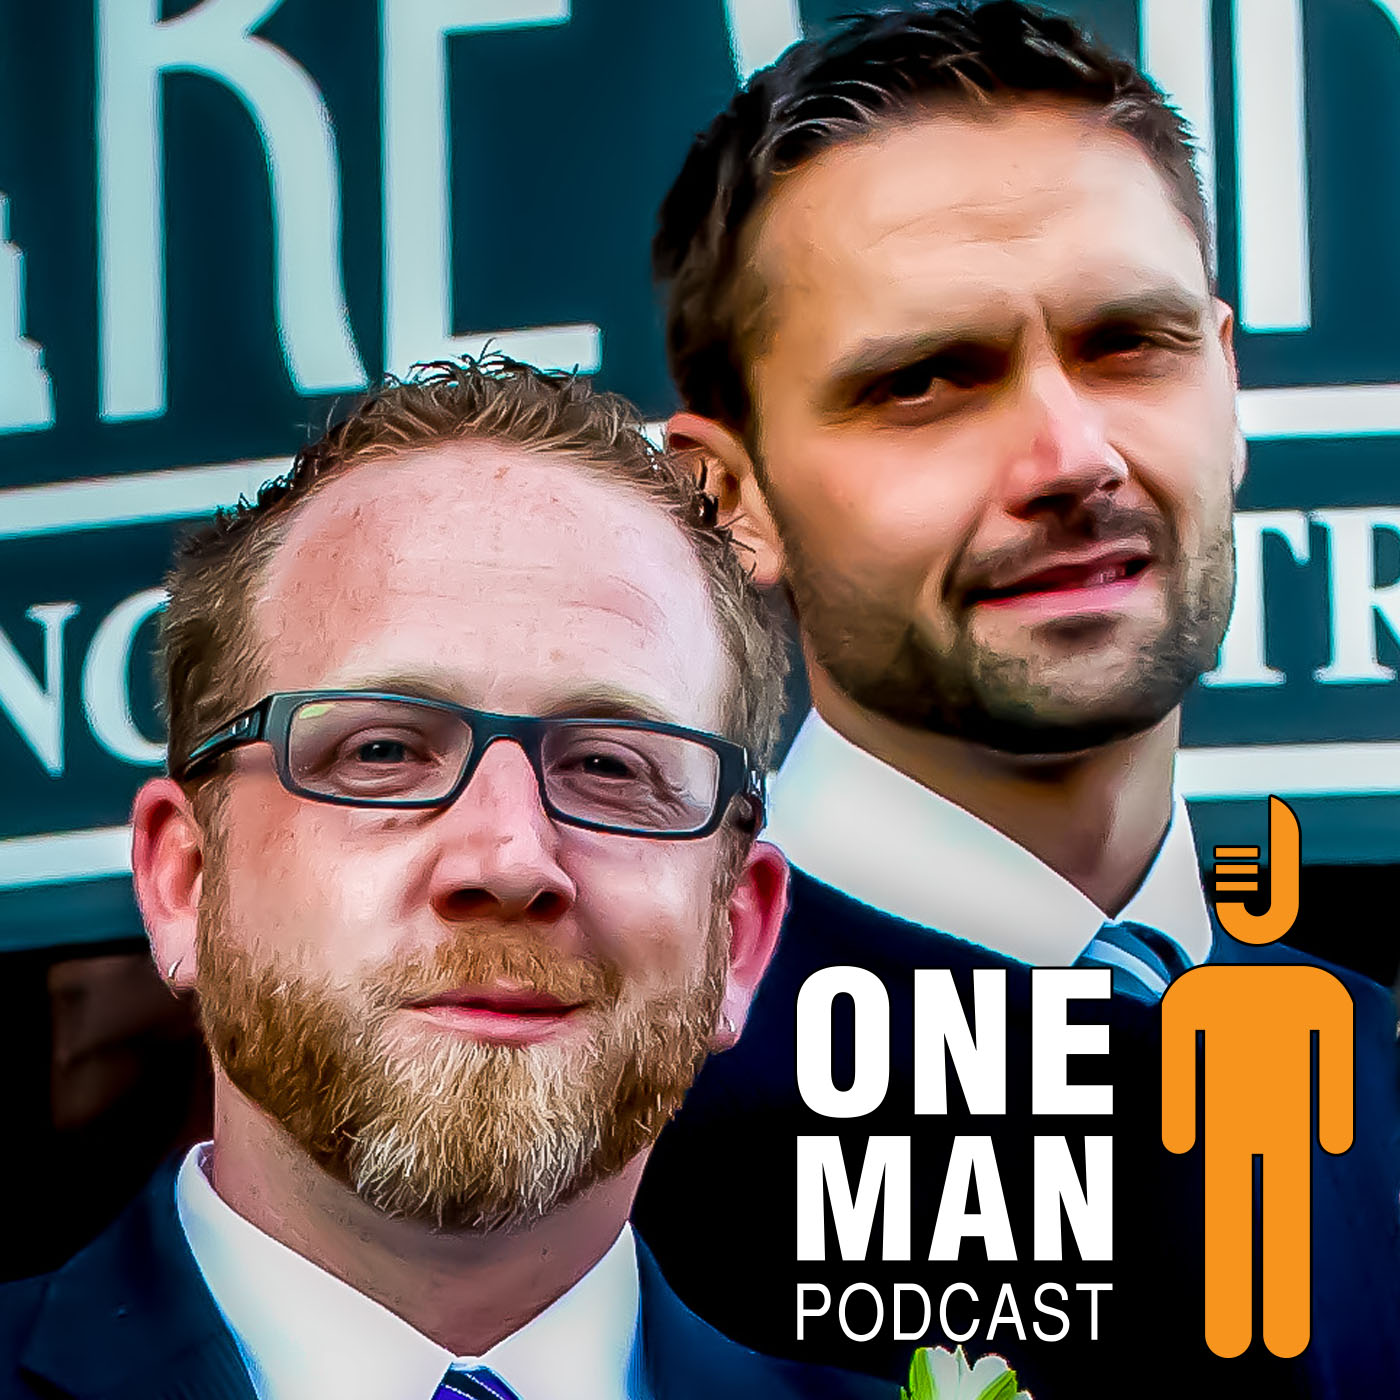 One Man Podcast - Jimmy & Micah